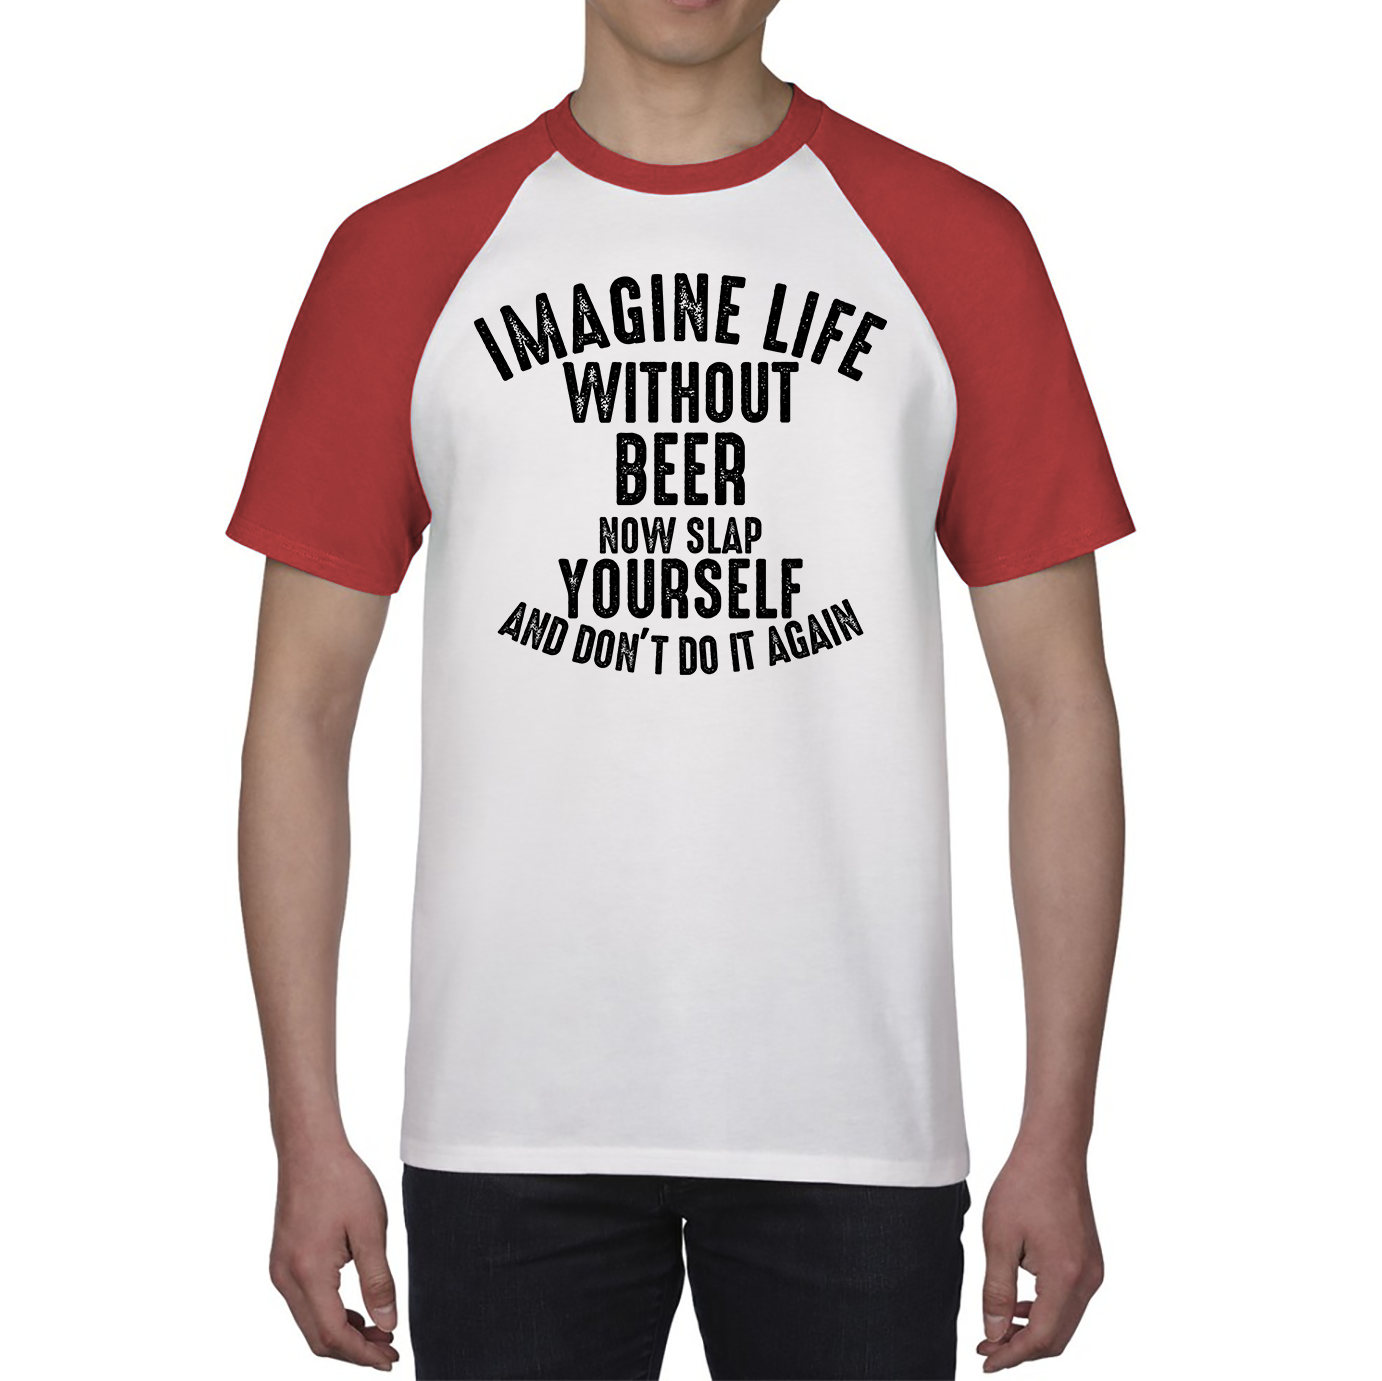 Imagine Life Without Beer Now Slap Yourself And Don' Do It Again Shirt Drink Lovers Beer Drinking Baseball T Shirt